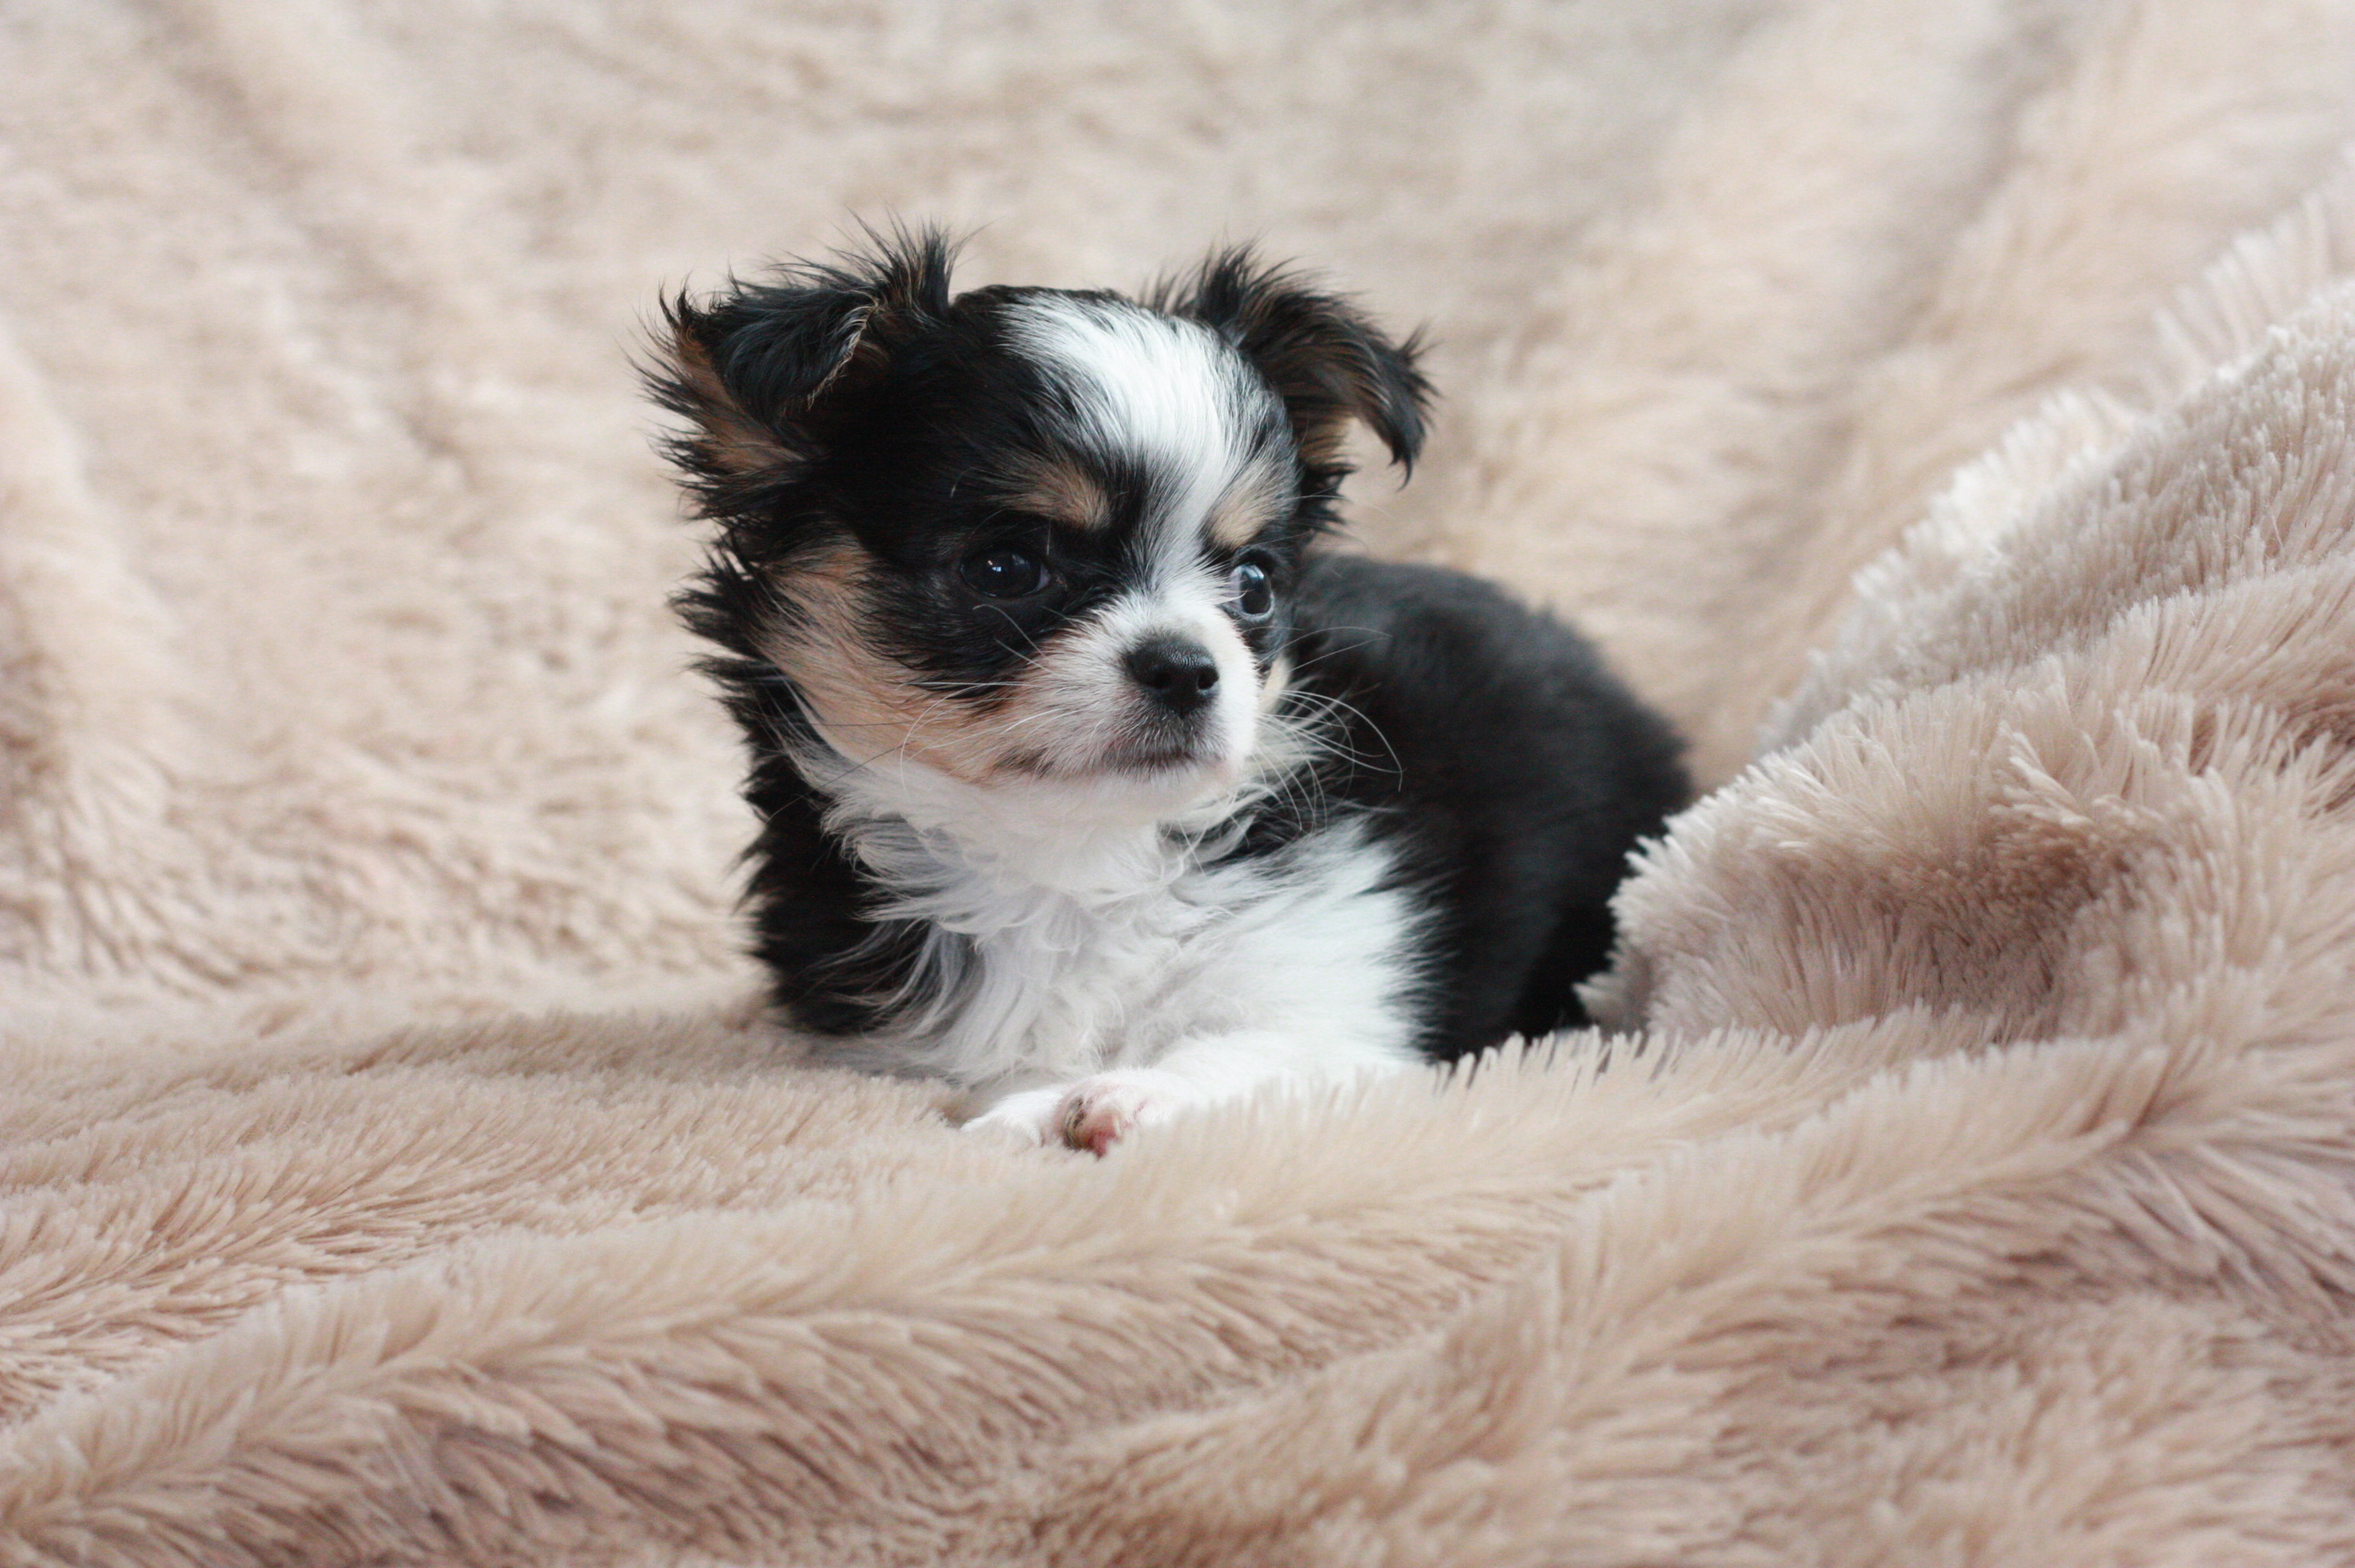 3088x2056 Specializing in Teacup Chihuahua Puppies for sale, Chihuahua Puppies, tiny  chihuahuas, chihuahuas for sale, all colors of chihuahua puppies for sale,  ...